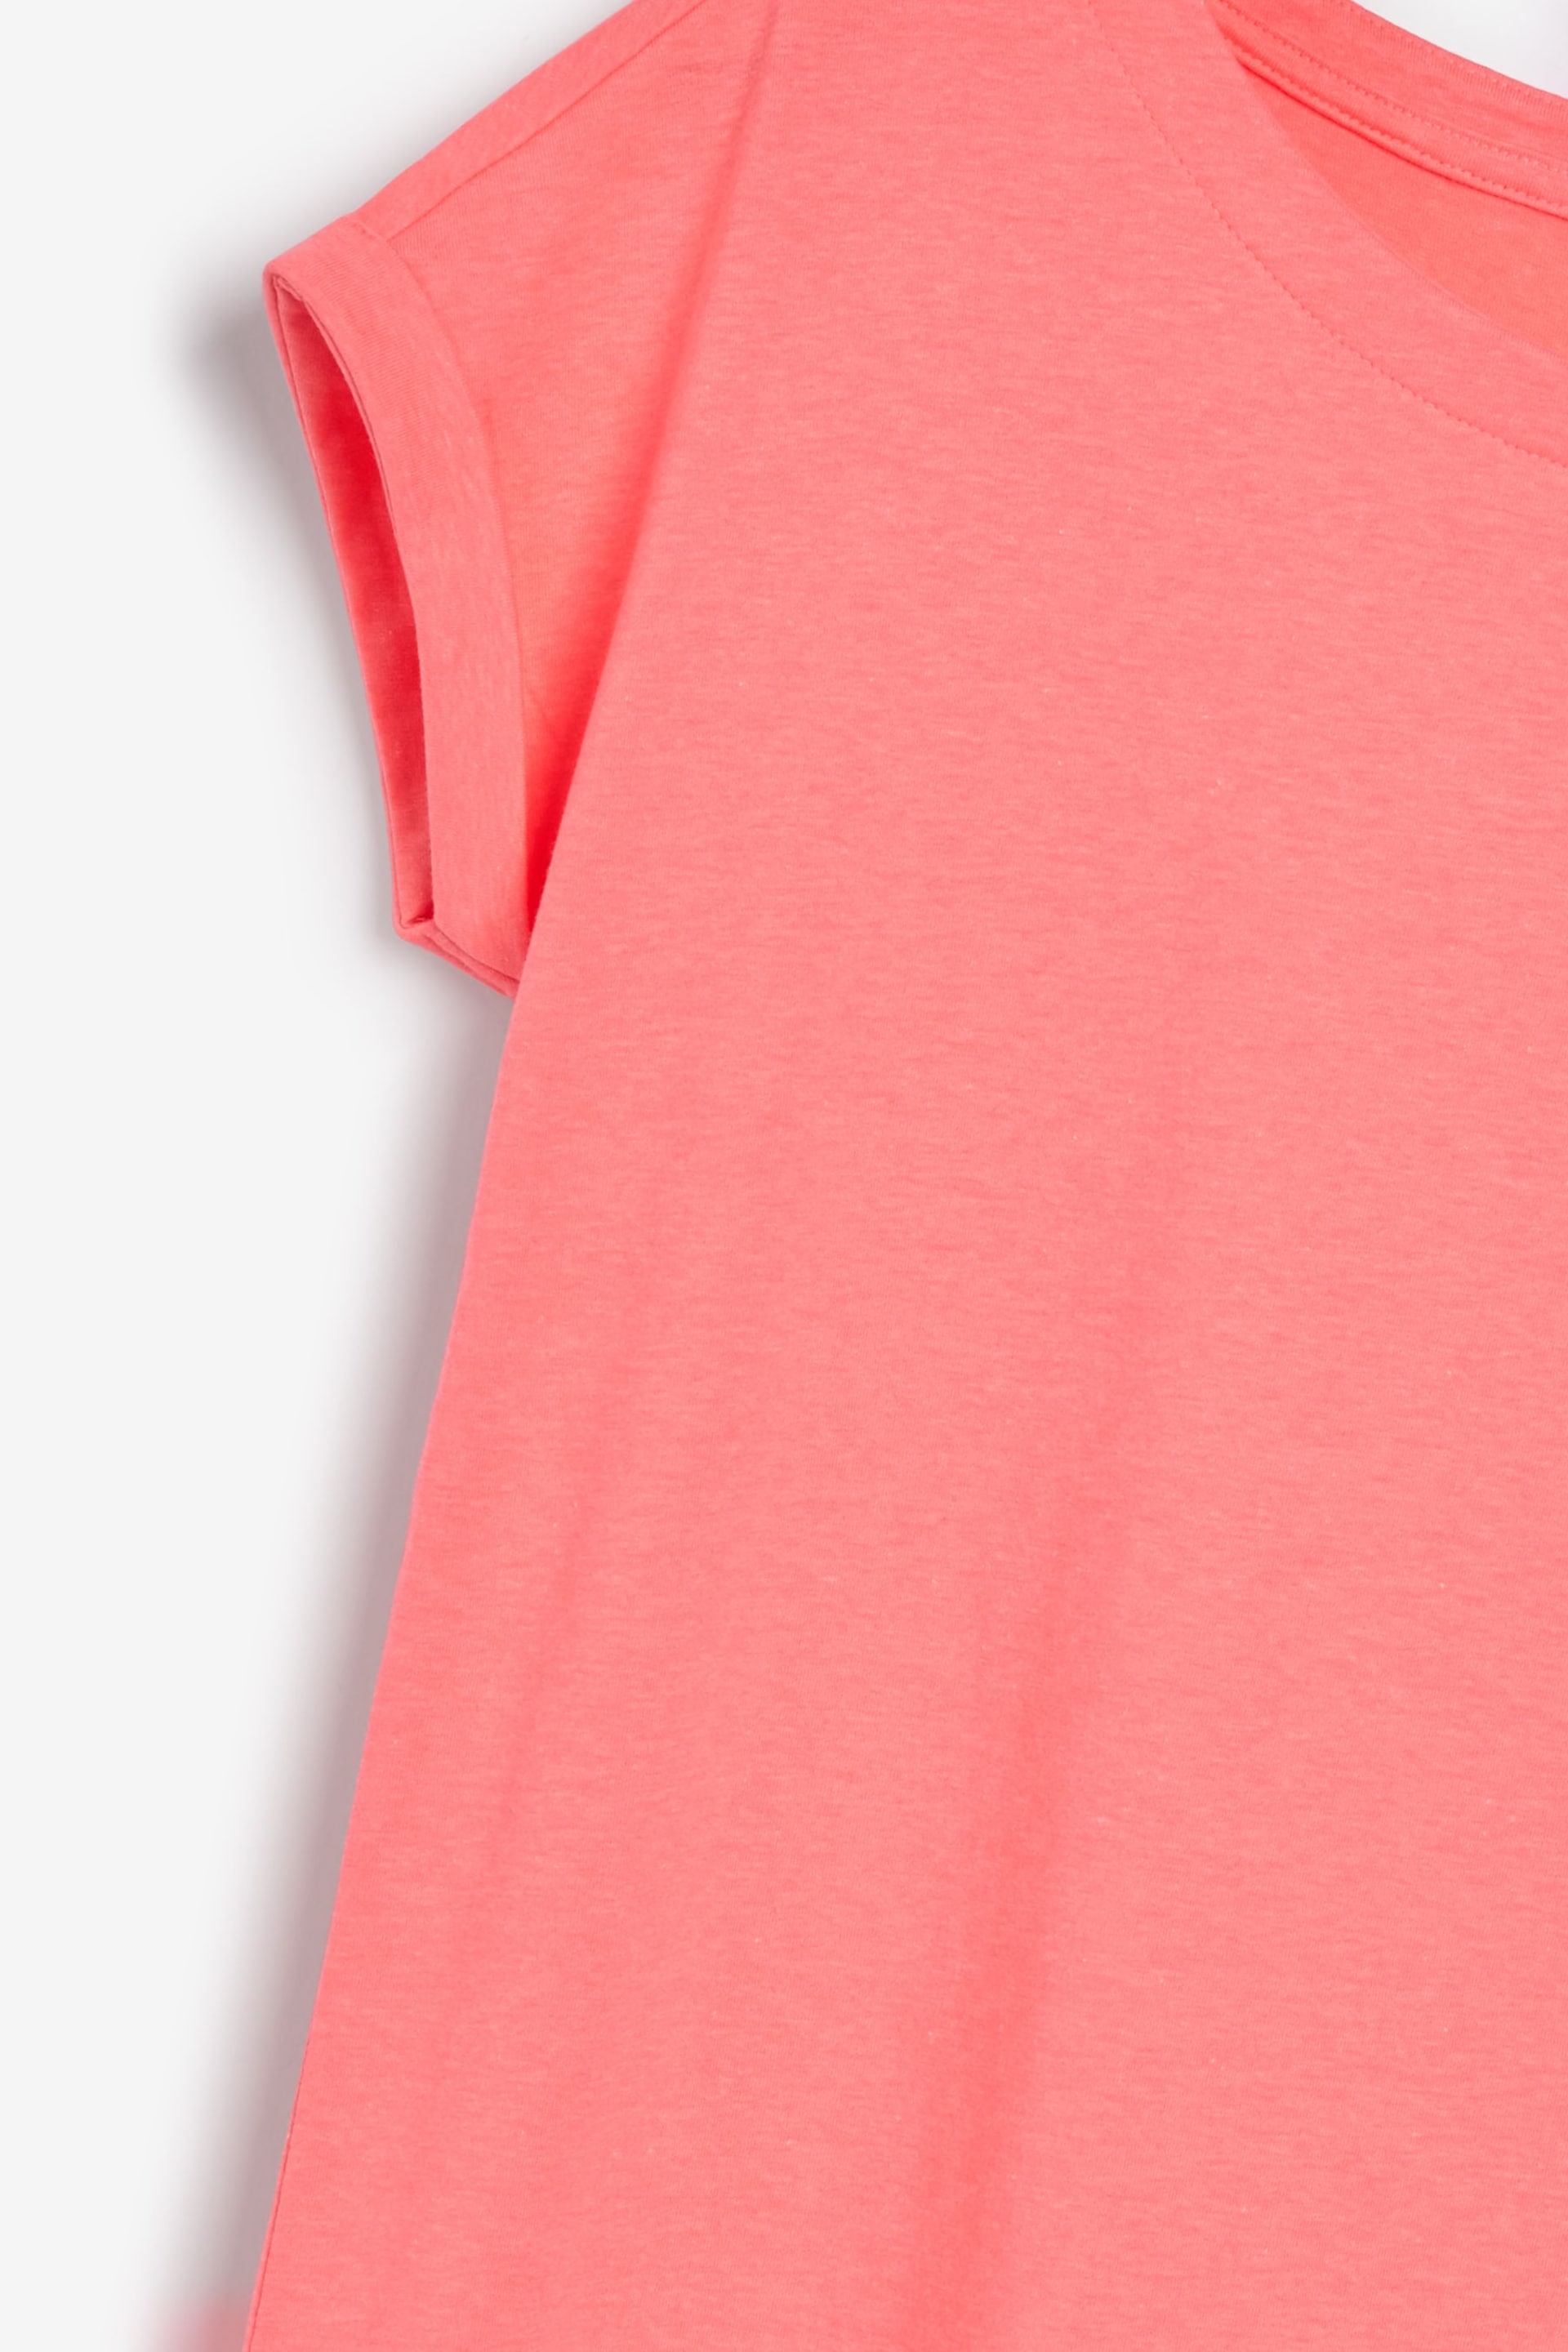 Fluro Coral Pink Round Neck Cap Sleeve T-Shirt - Image 4 of 4